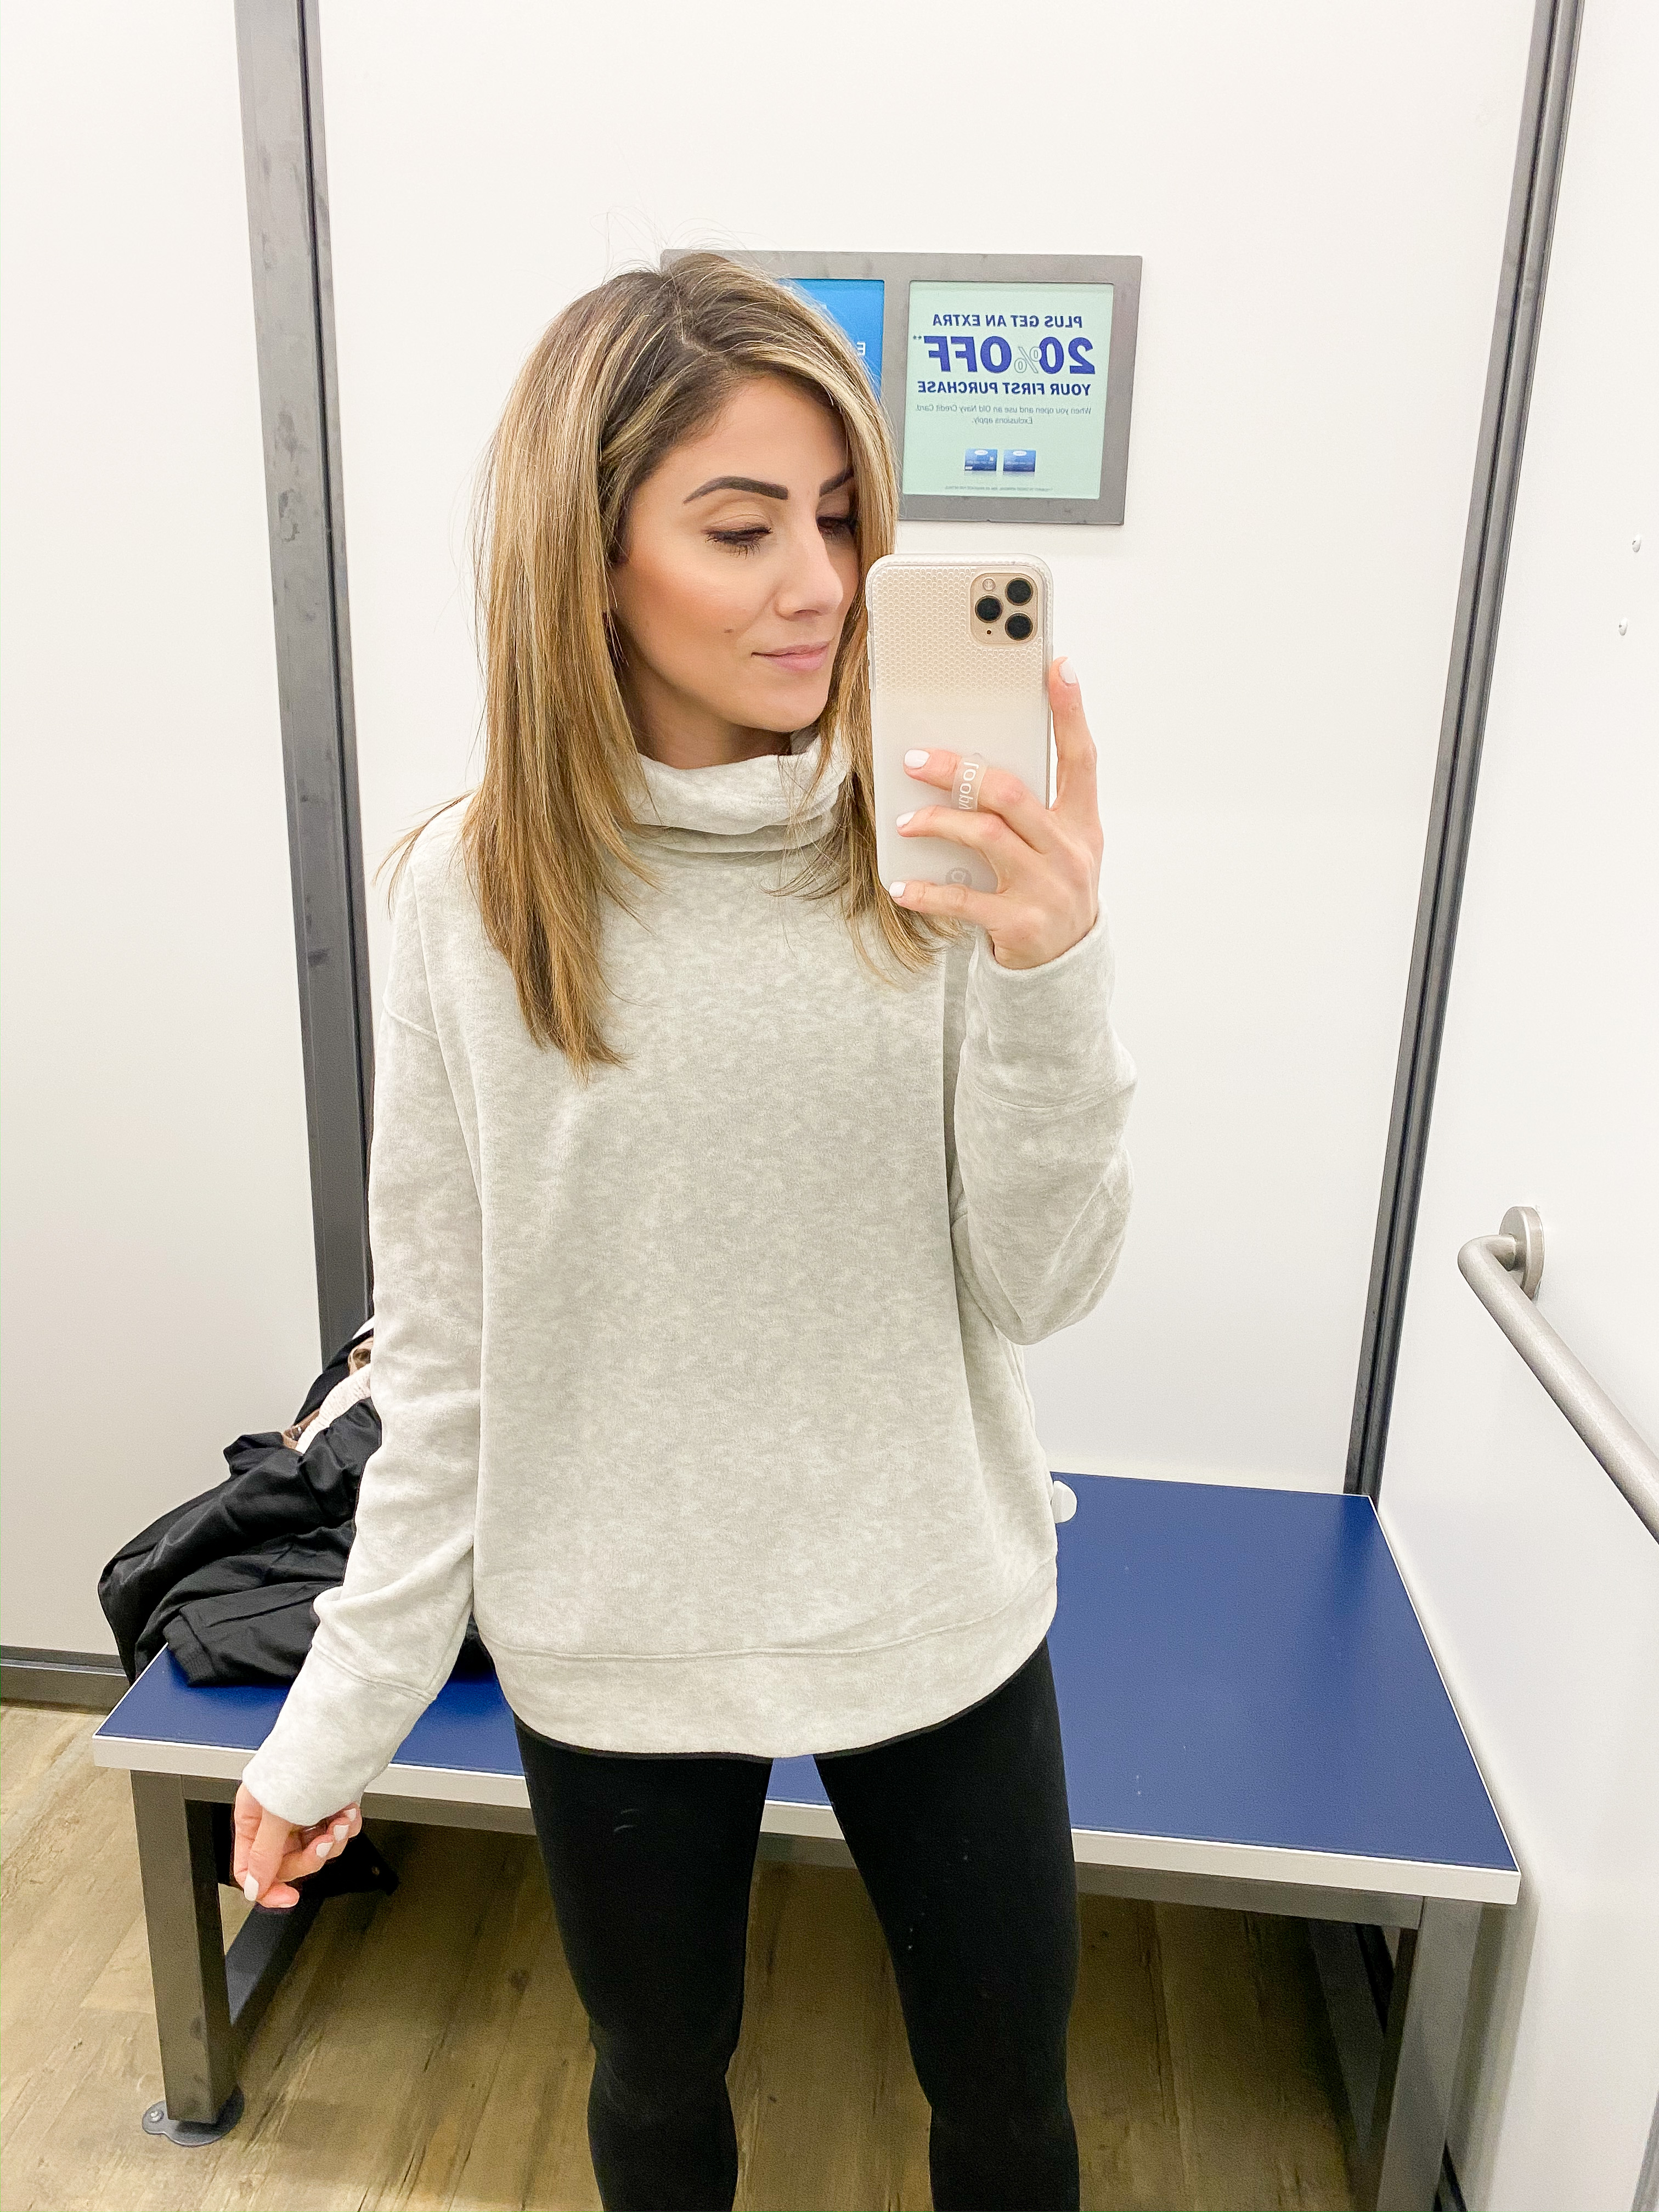 Connecticut life and style blogger Lauren McBride shares an Old Navy try on featuring athletic clothing and athleisure wear.